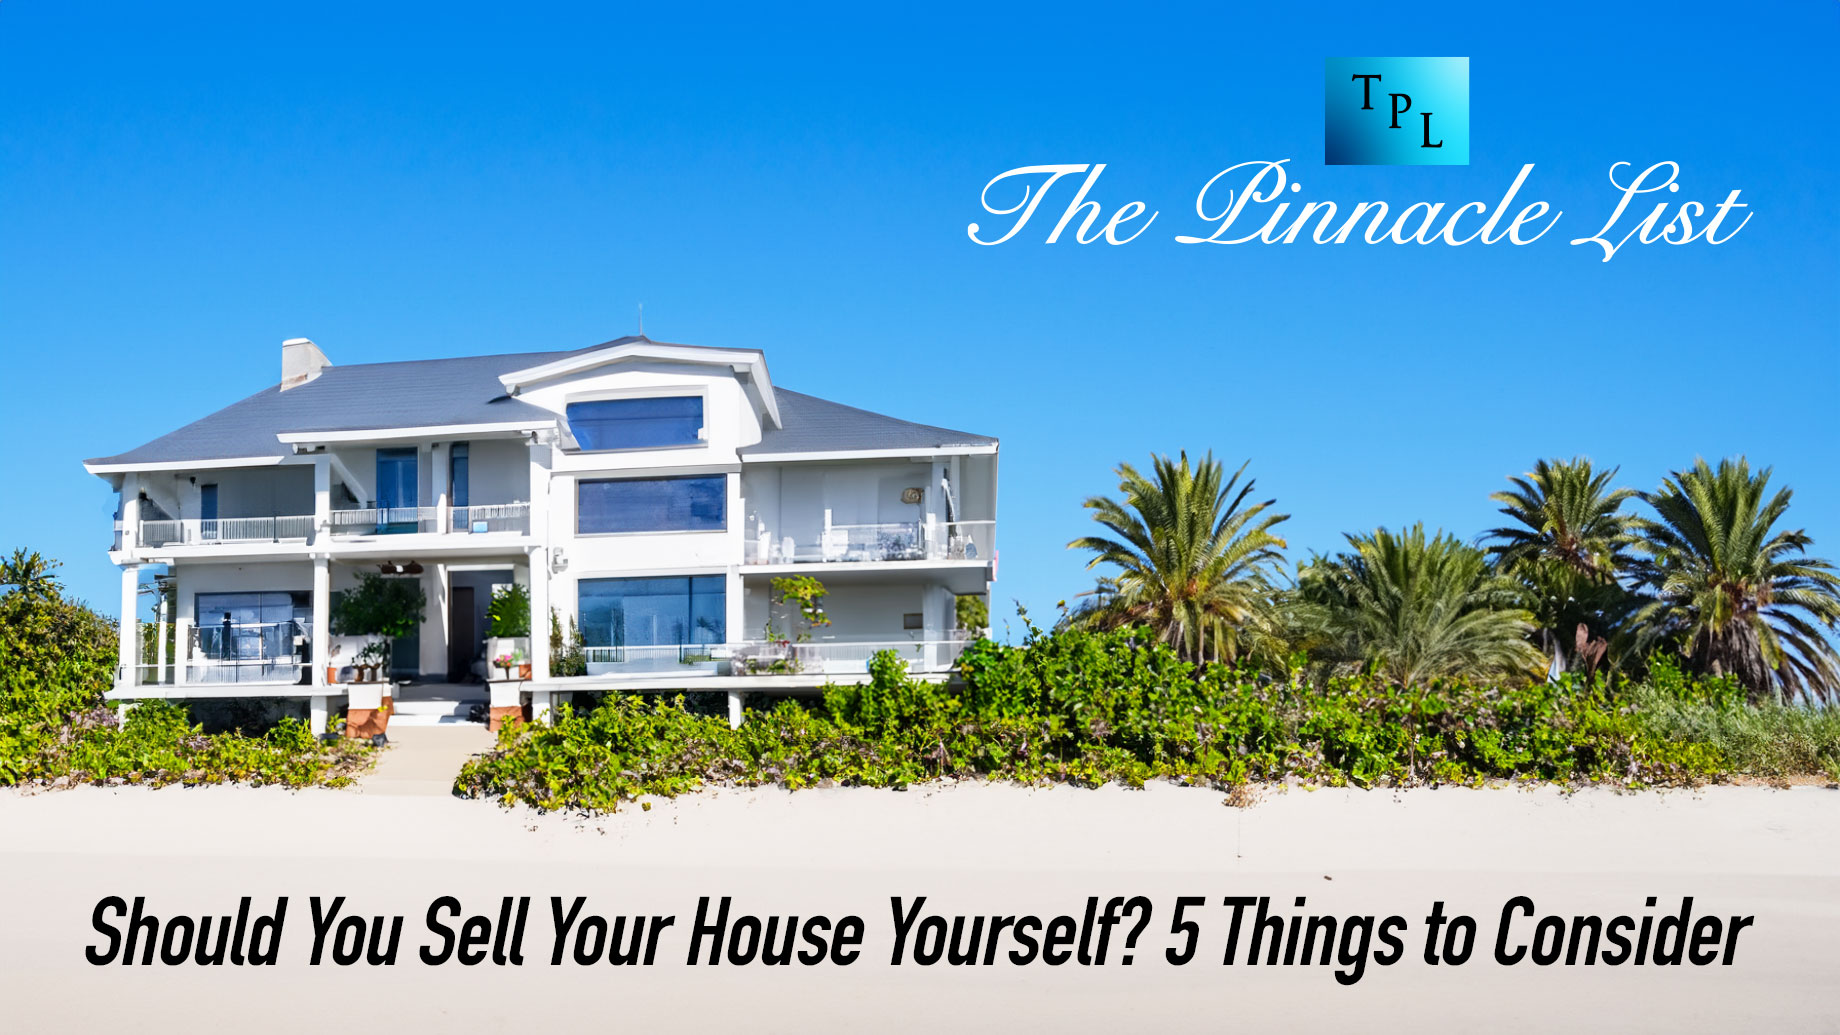 Should You Sell Your House Yourself? 5 Things to Consider